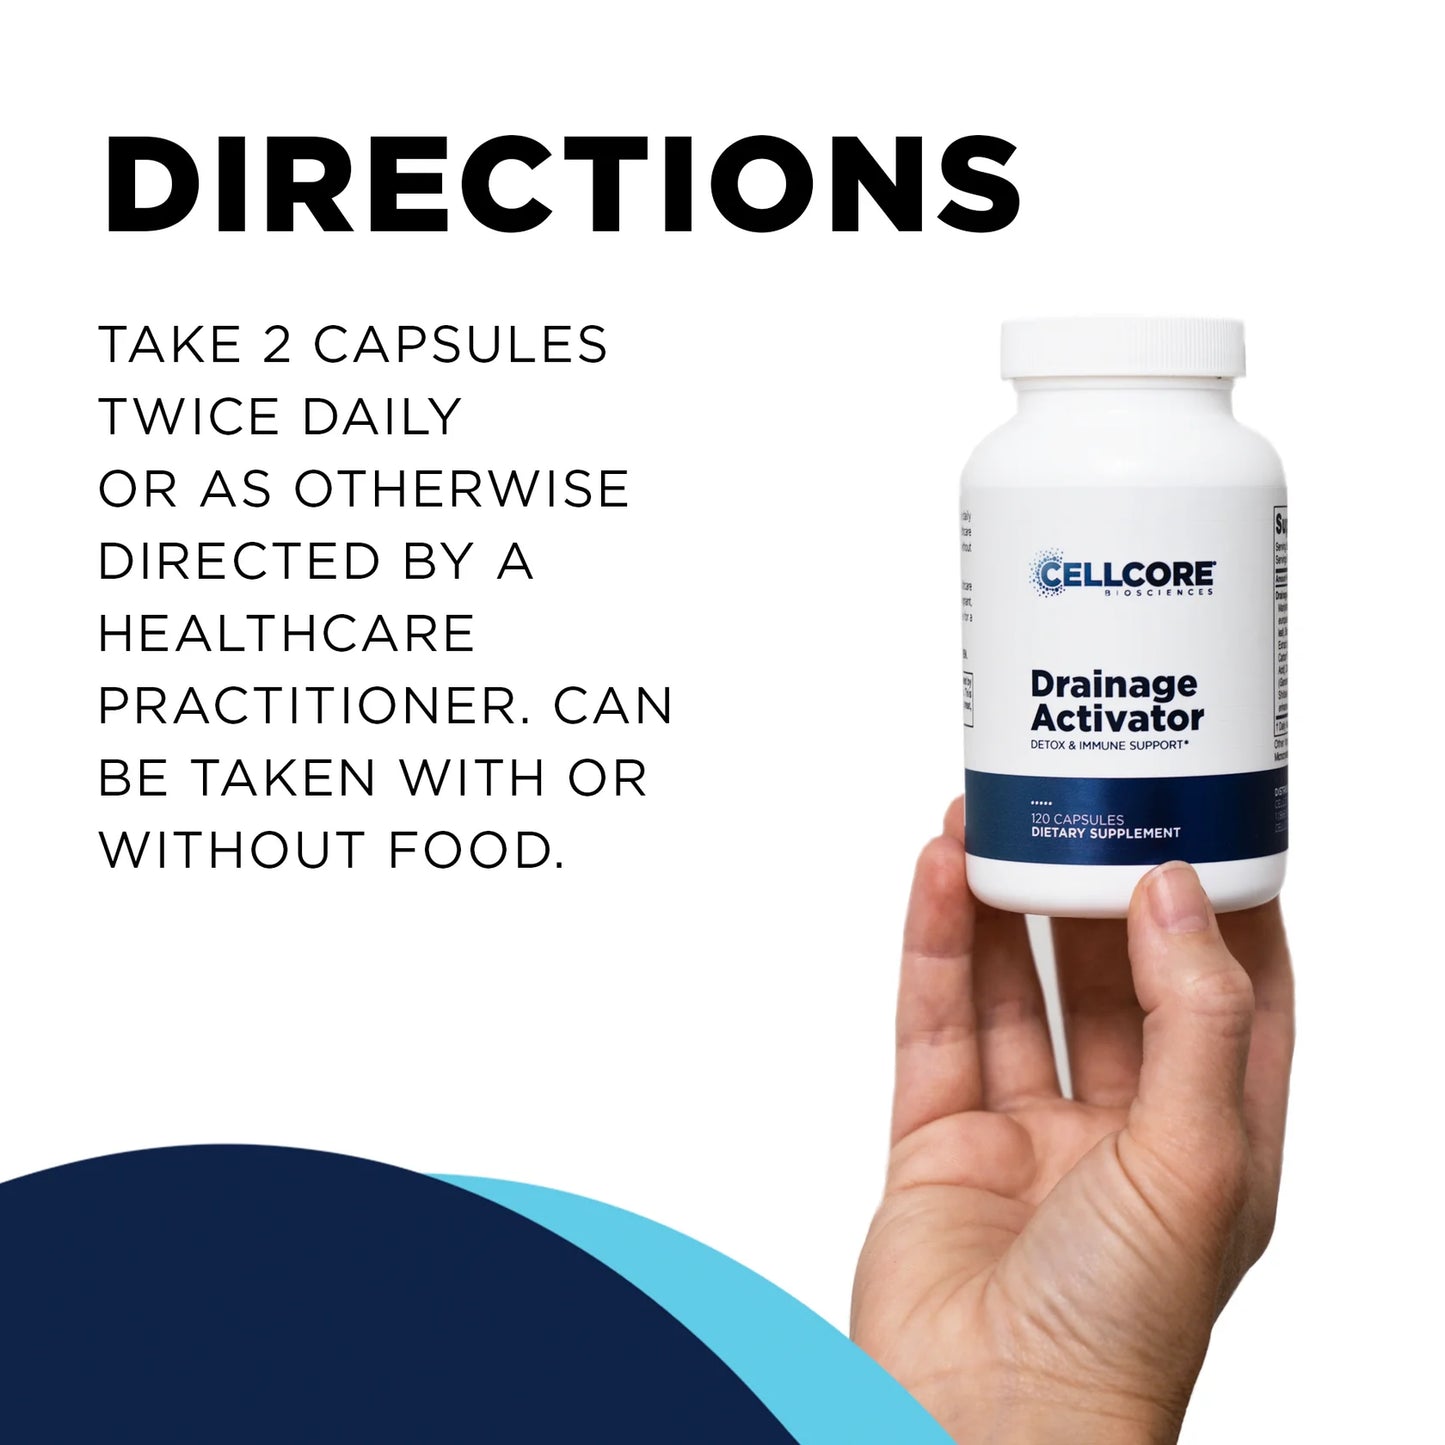 Drainage Activator by Cellcore